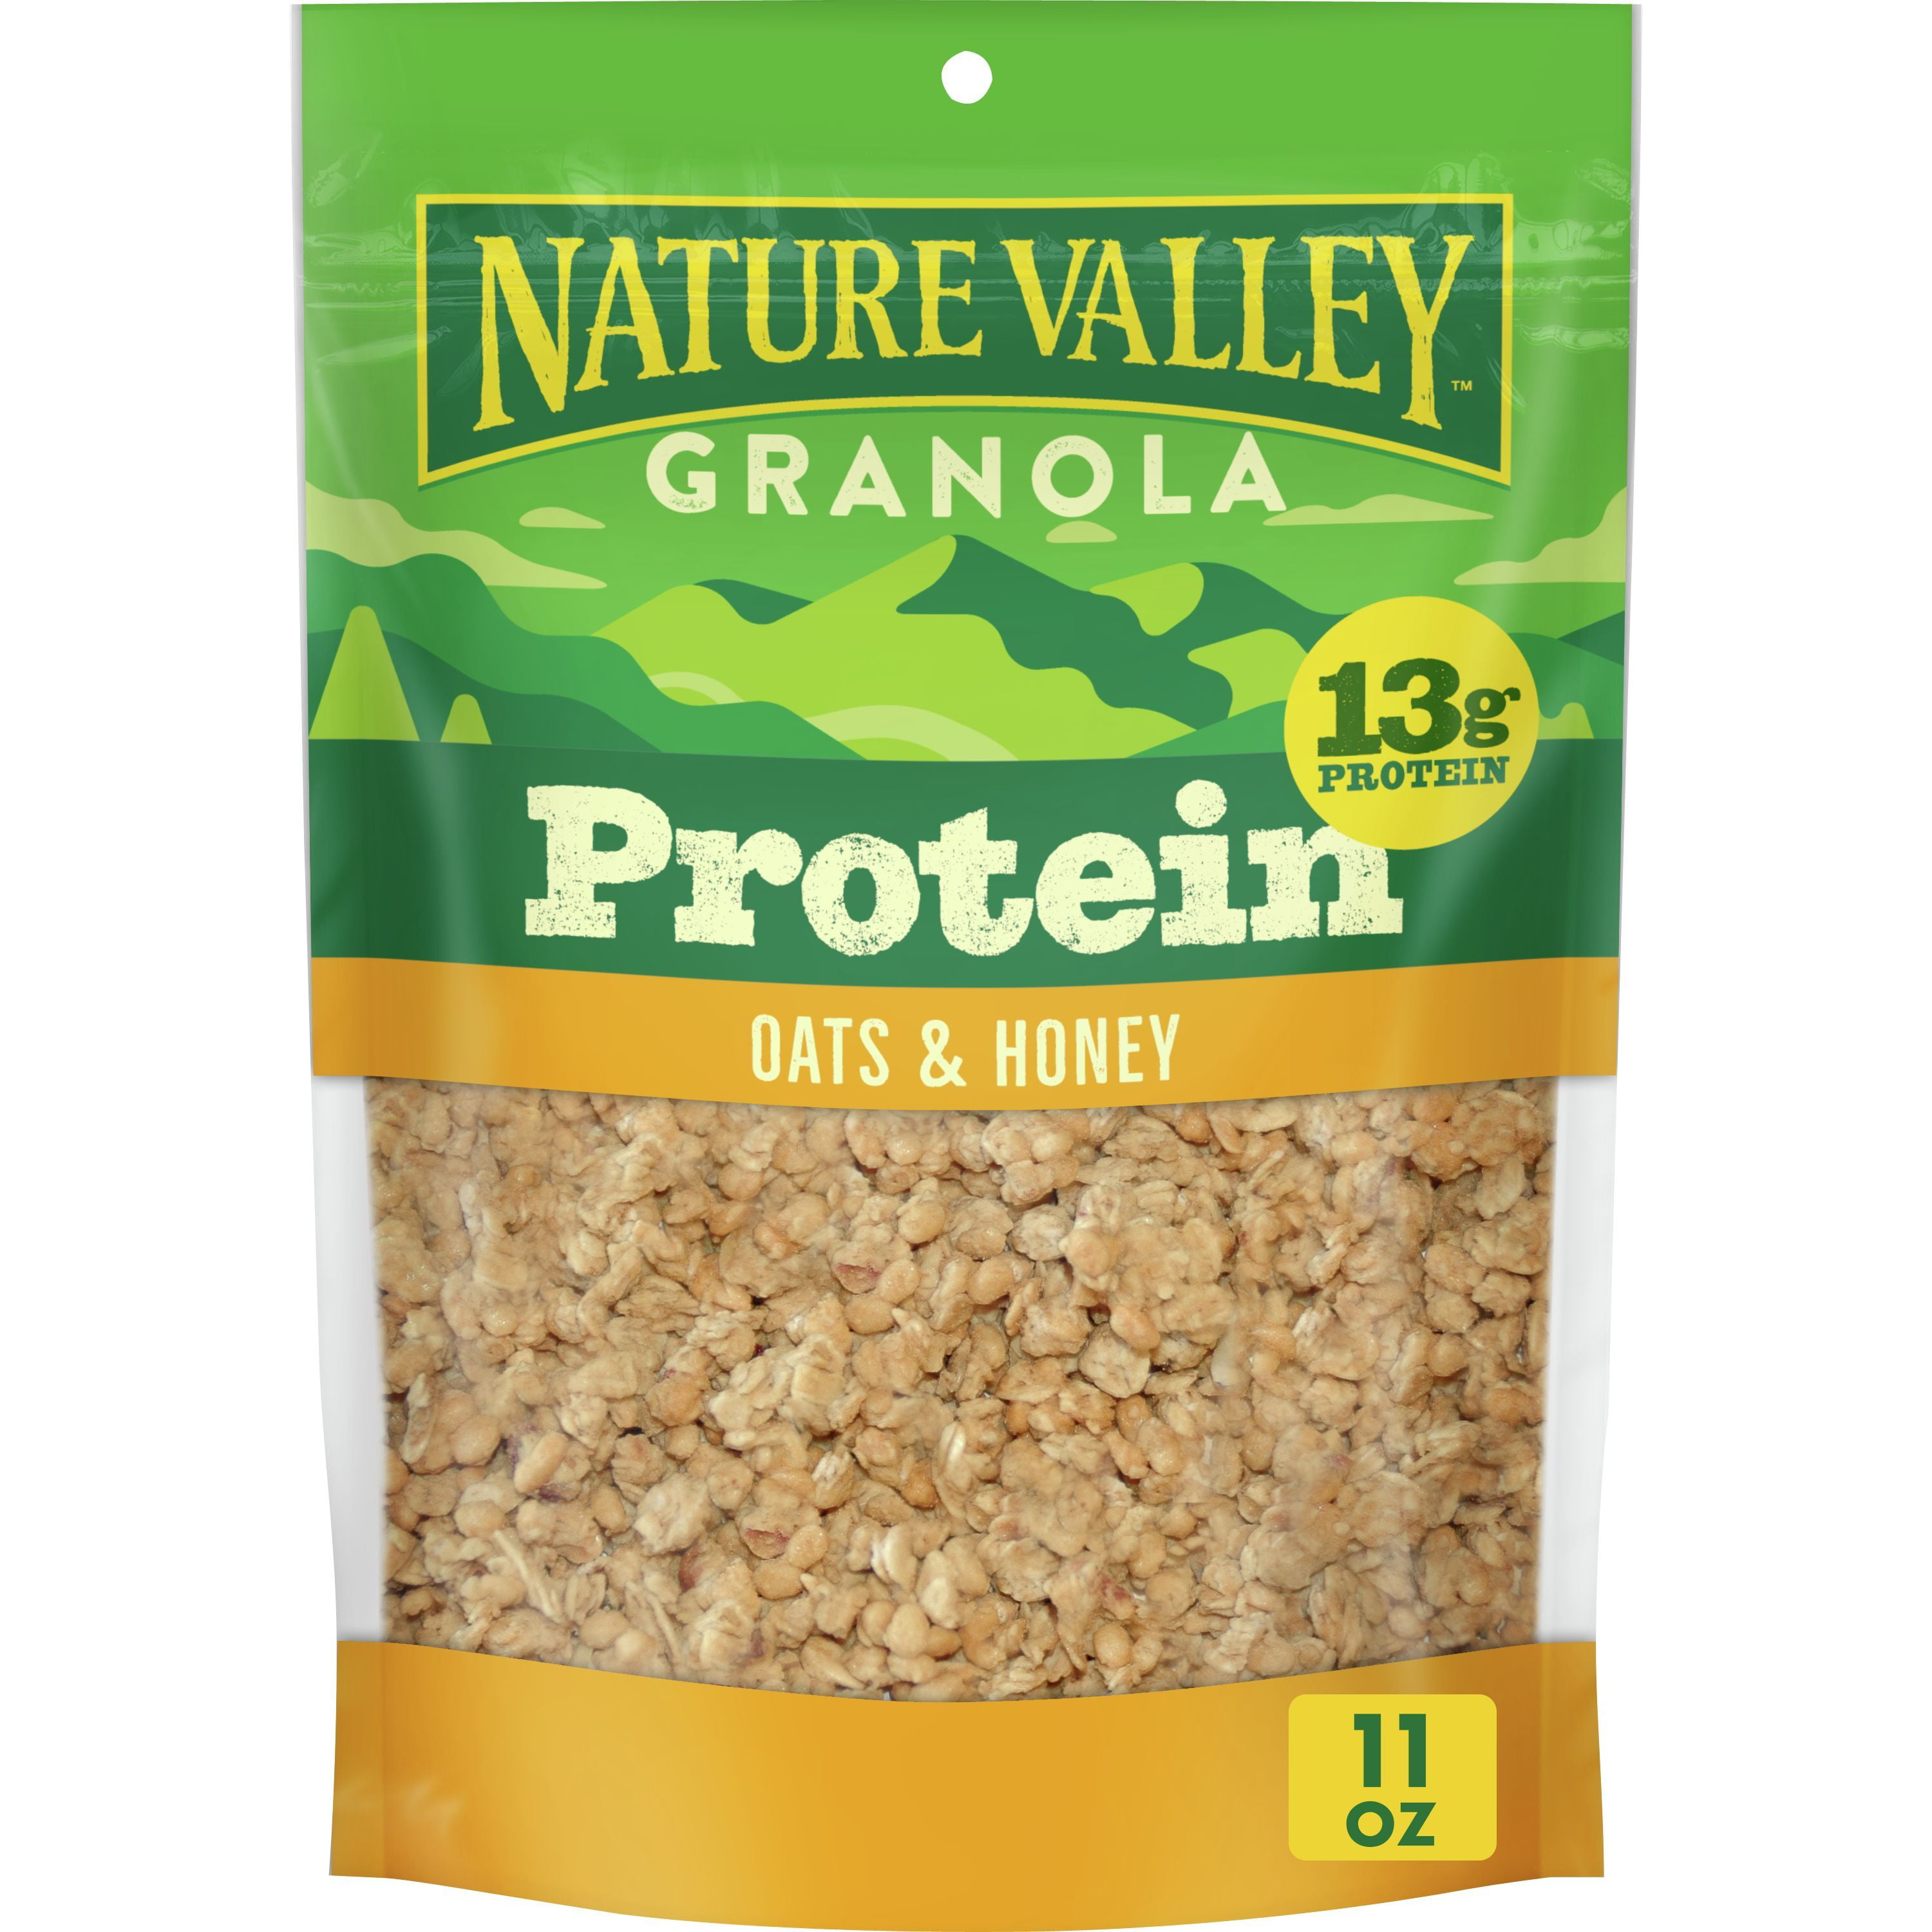 Nature Valley, Oats & Honey Protein Granola, 11 oz pouch